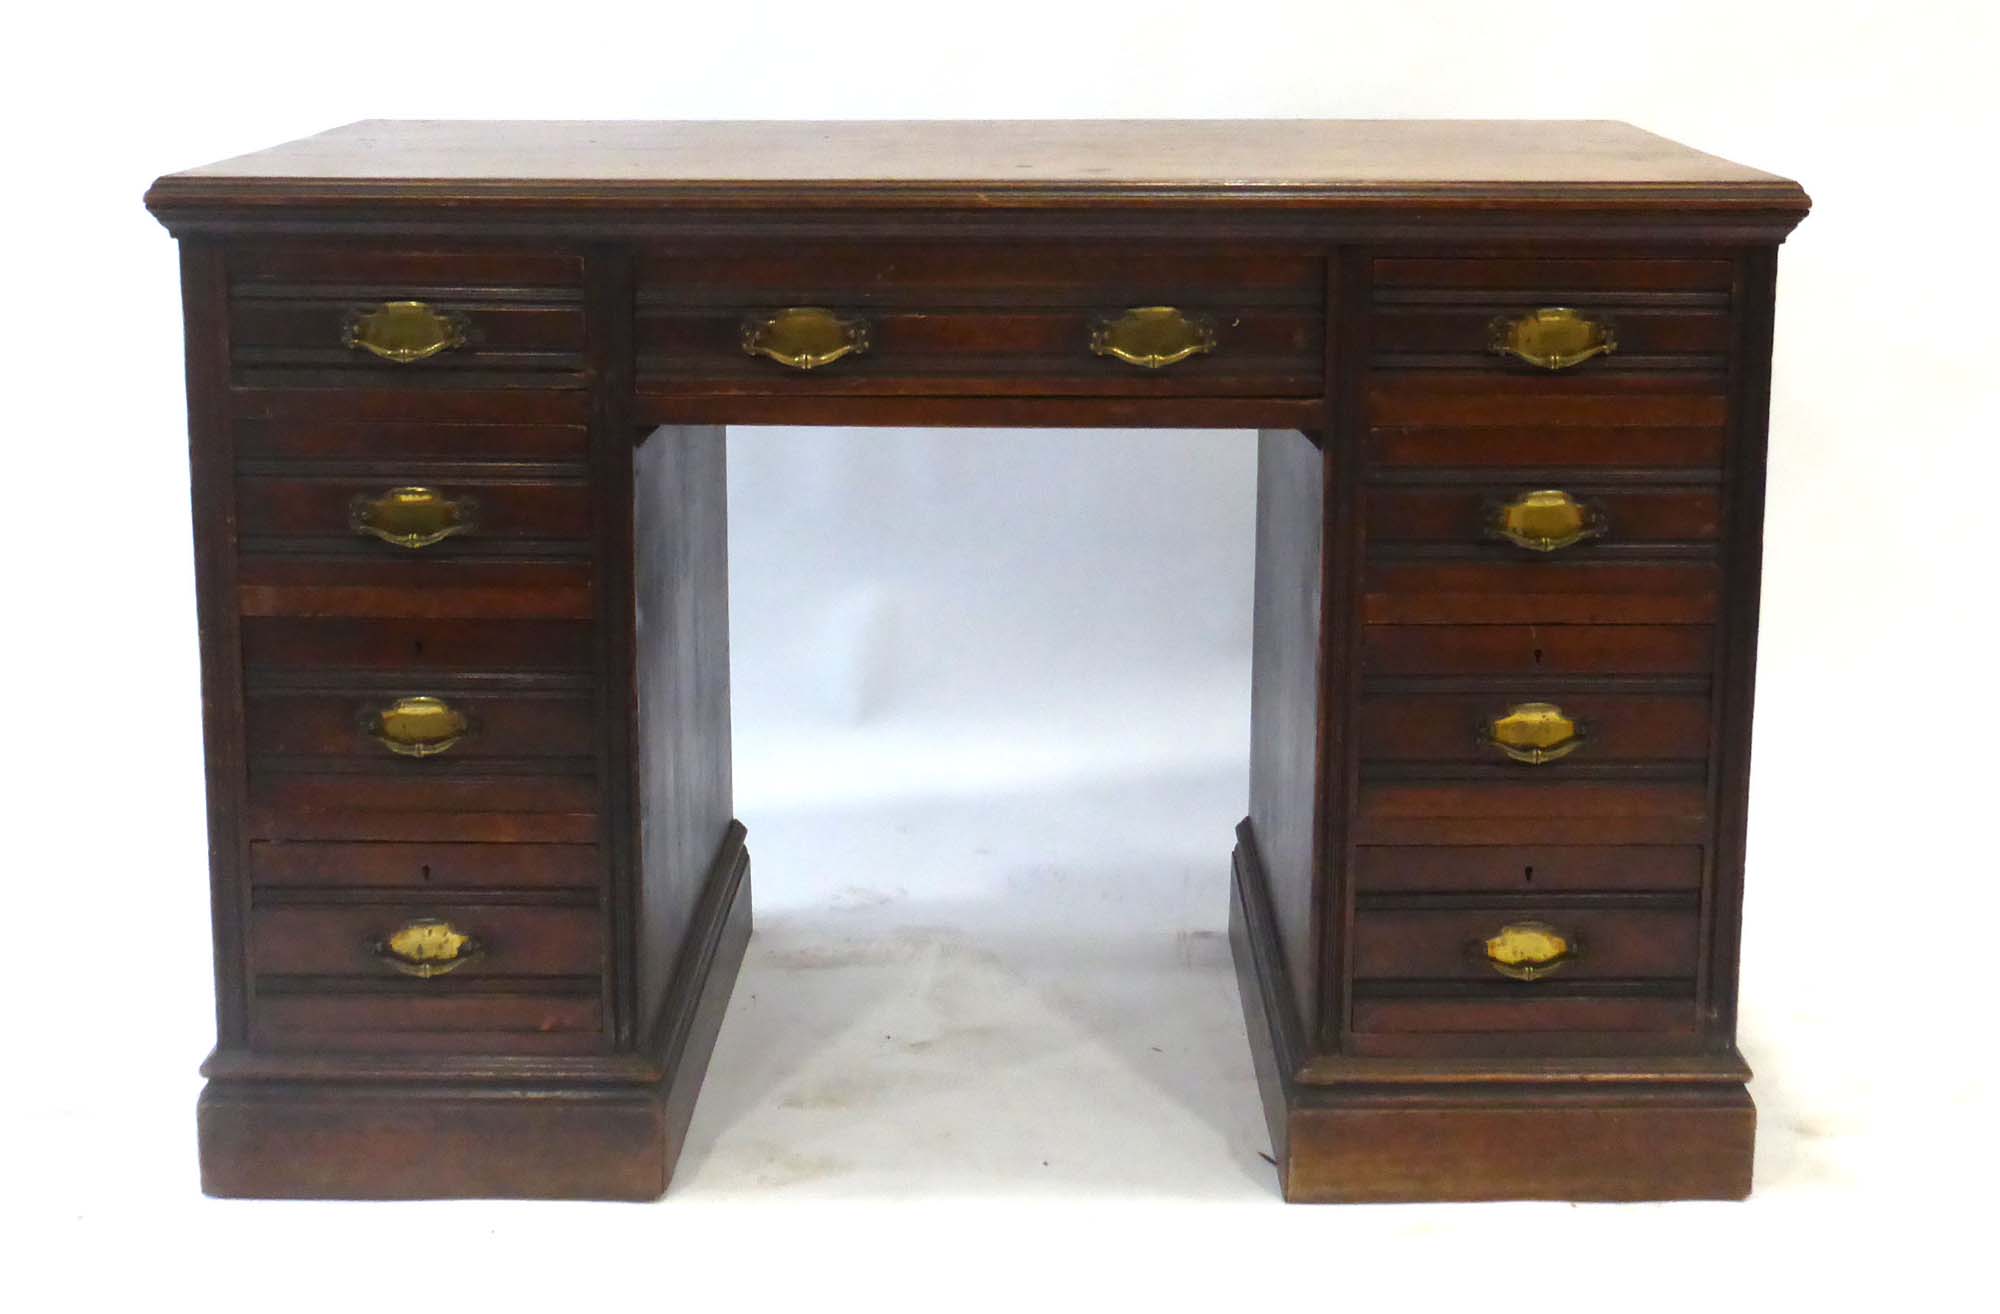 A Victorian mahogany twin pedestal desk with an arrangement of nine drawers on plinth bases, l. - Image 2 of 3